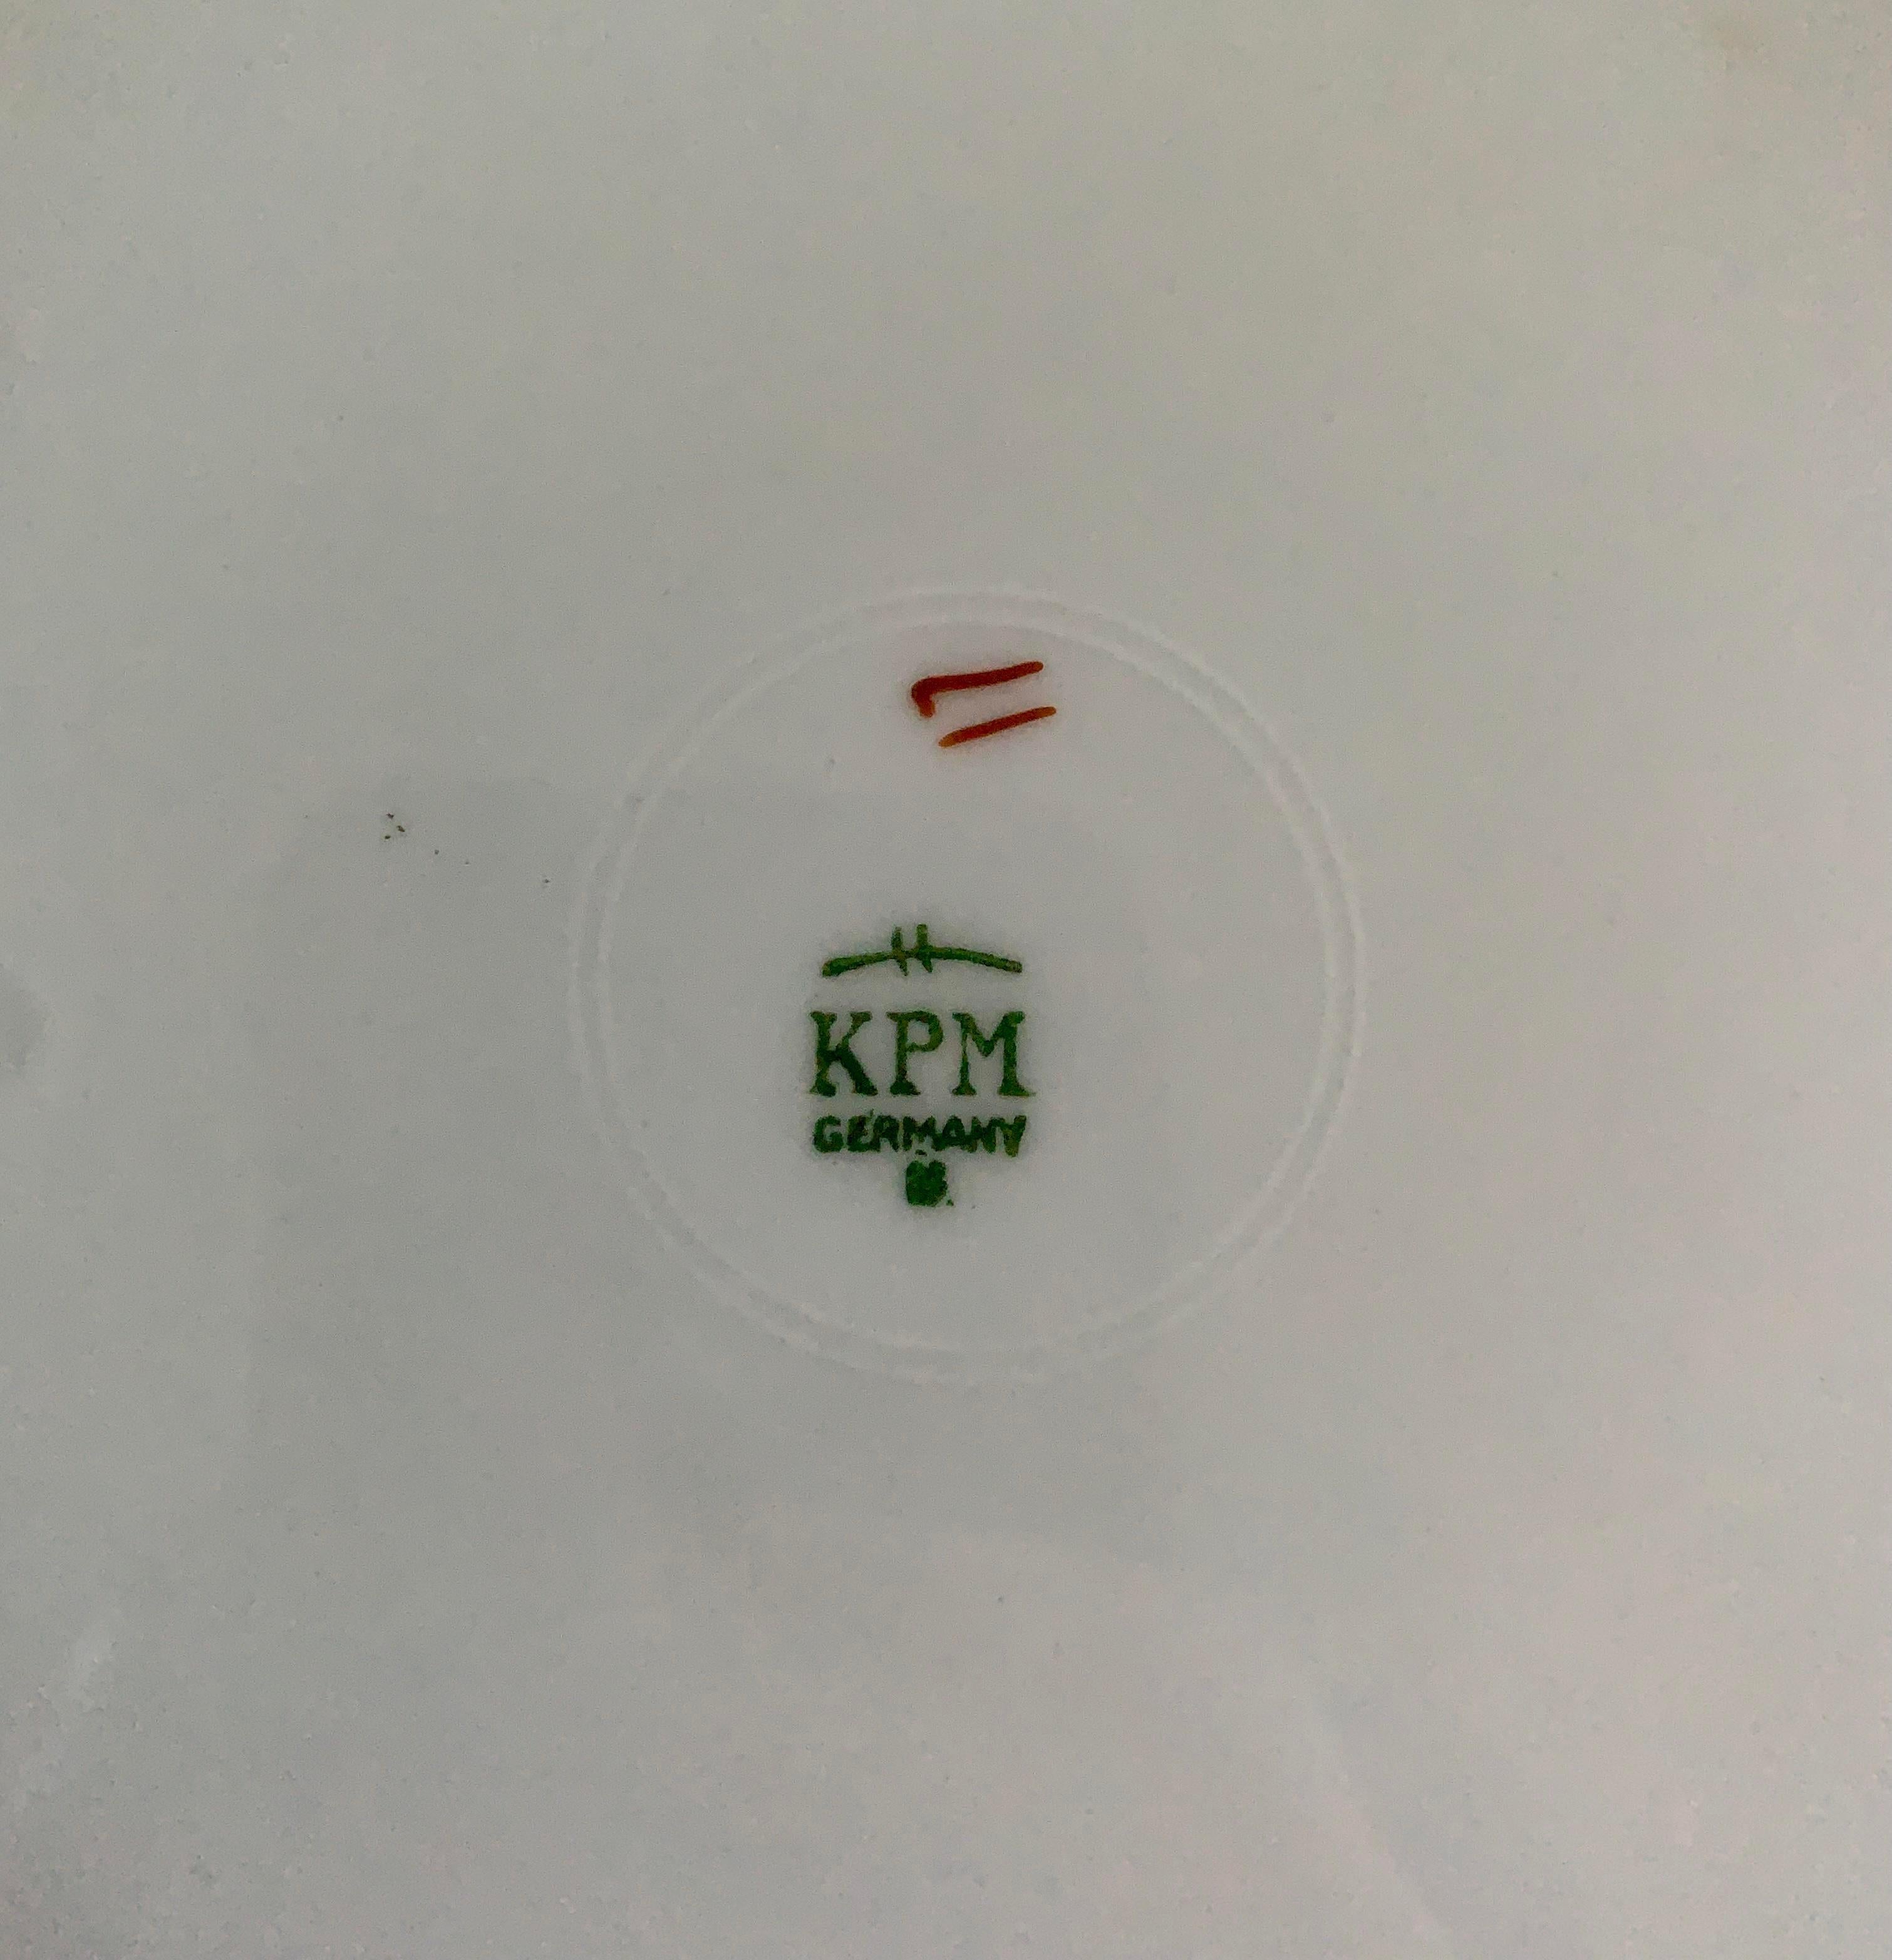 Antique German Greek Key Rimmed Luncheon Plates by Kpm, 1920s In Good Condition For Sale In Elkhart, IN